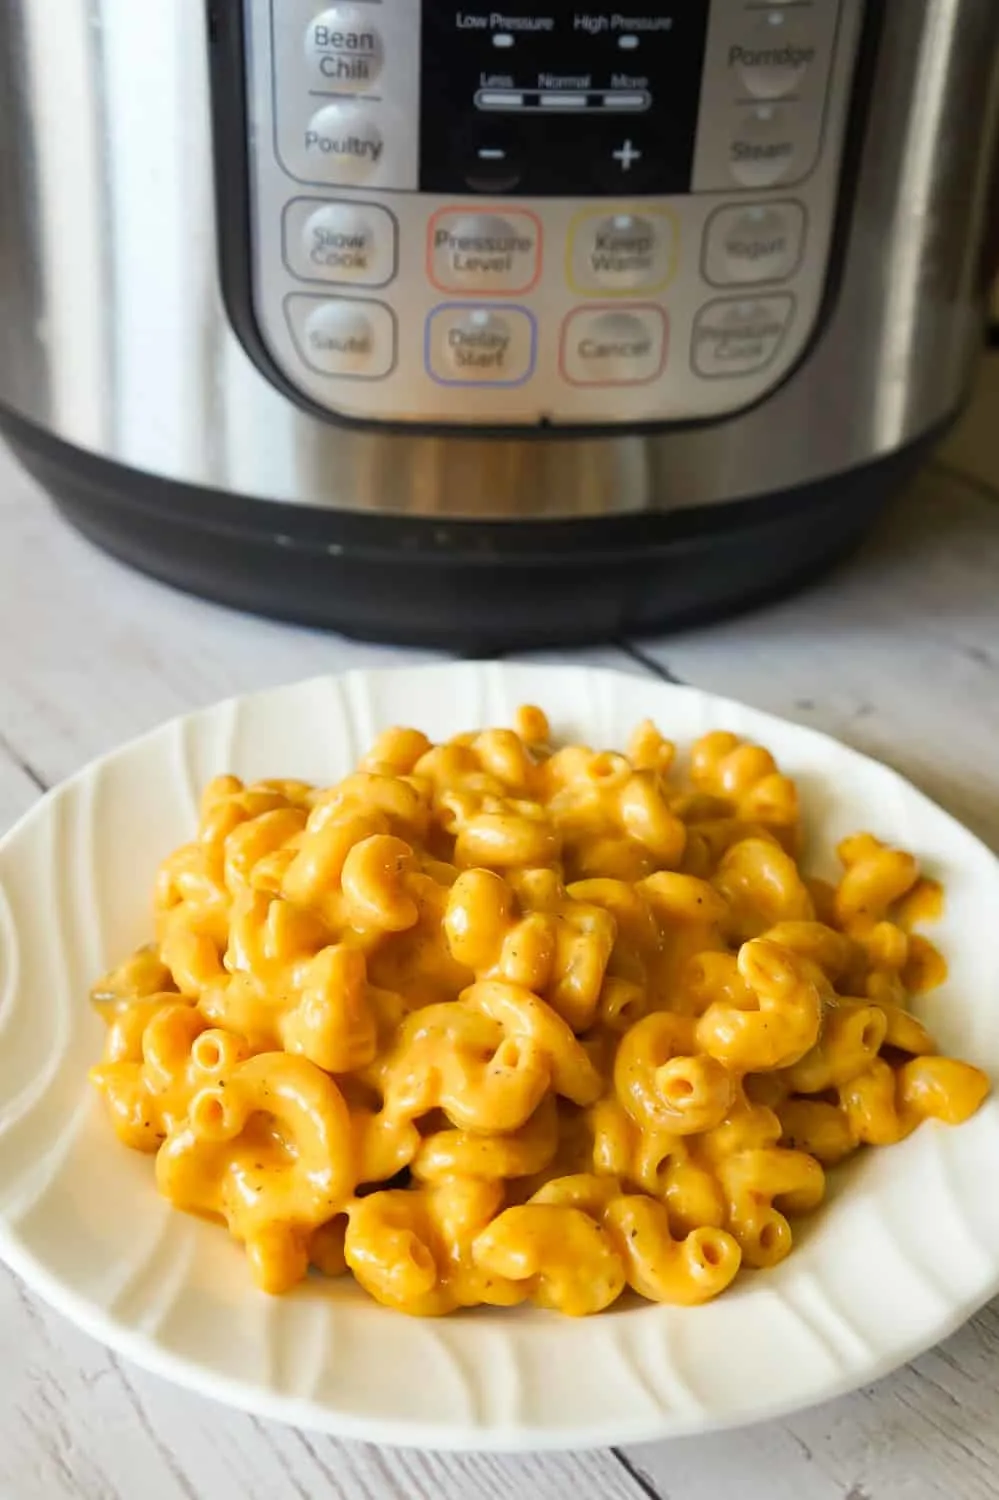 Instant Pot Pumpkin Mac and Cheese is a delicious pressure cooker pasta recipe using canned pumpkin, cavatappi noodles and Havarti cheese.